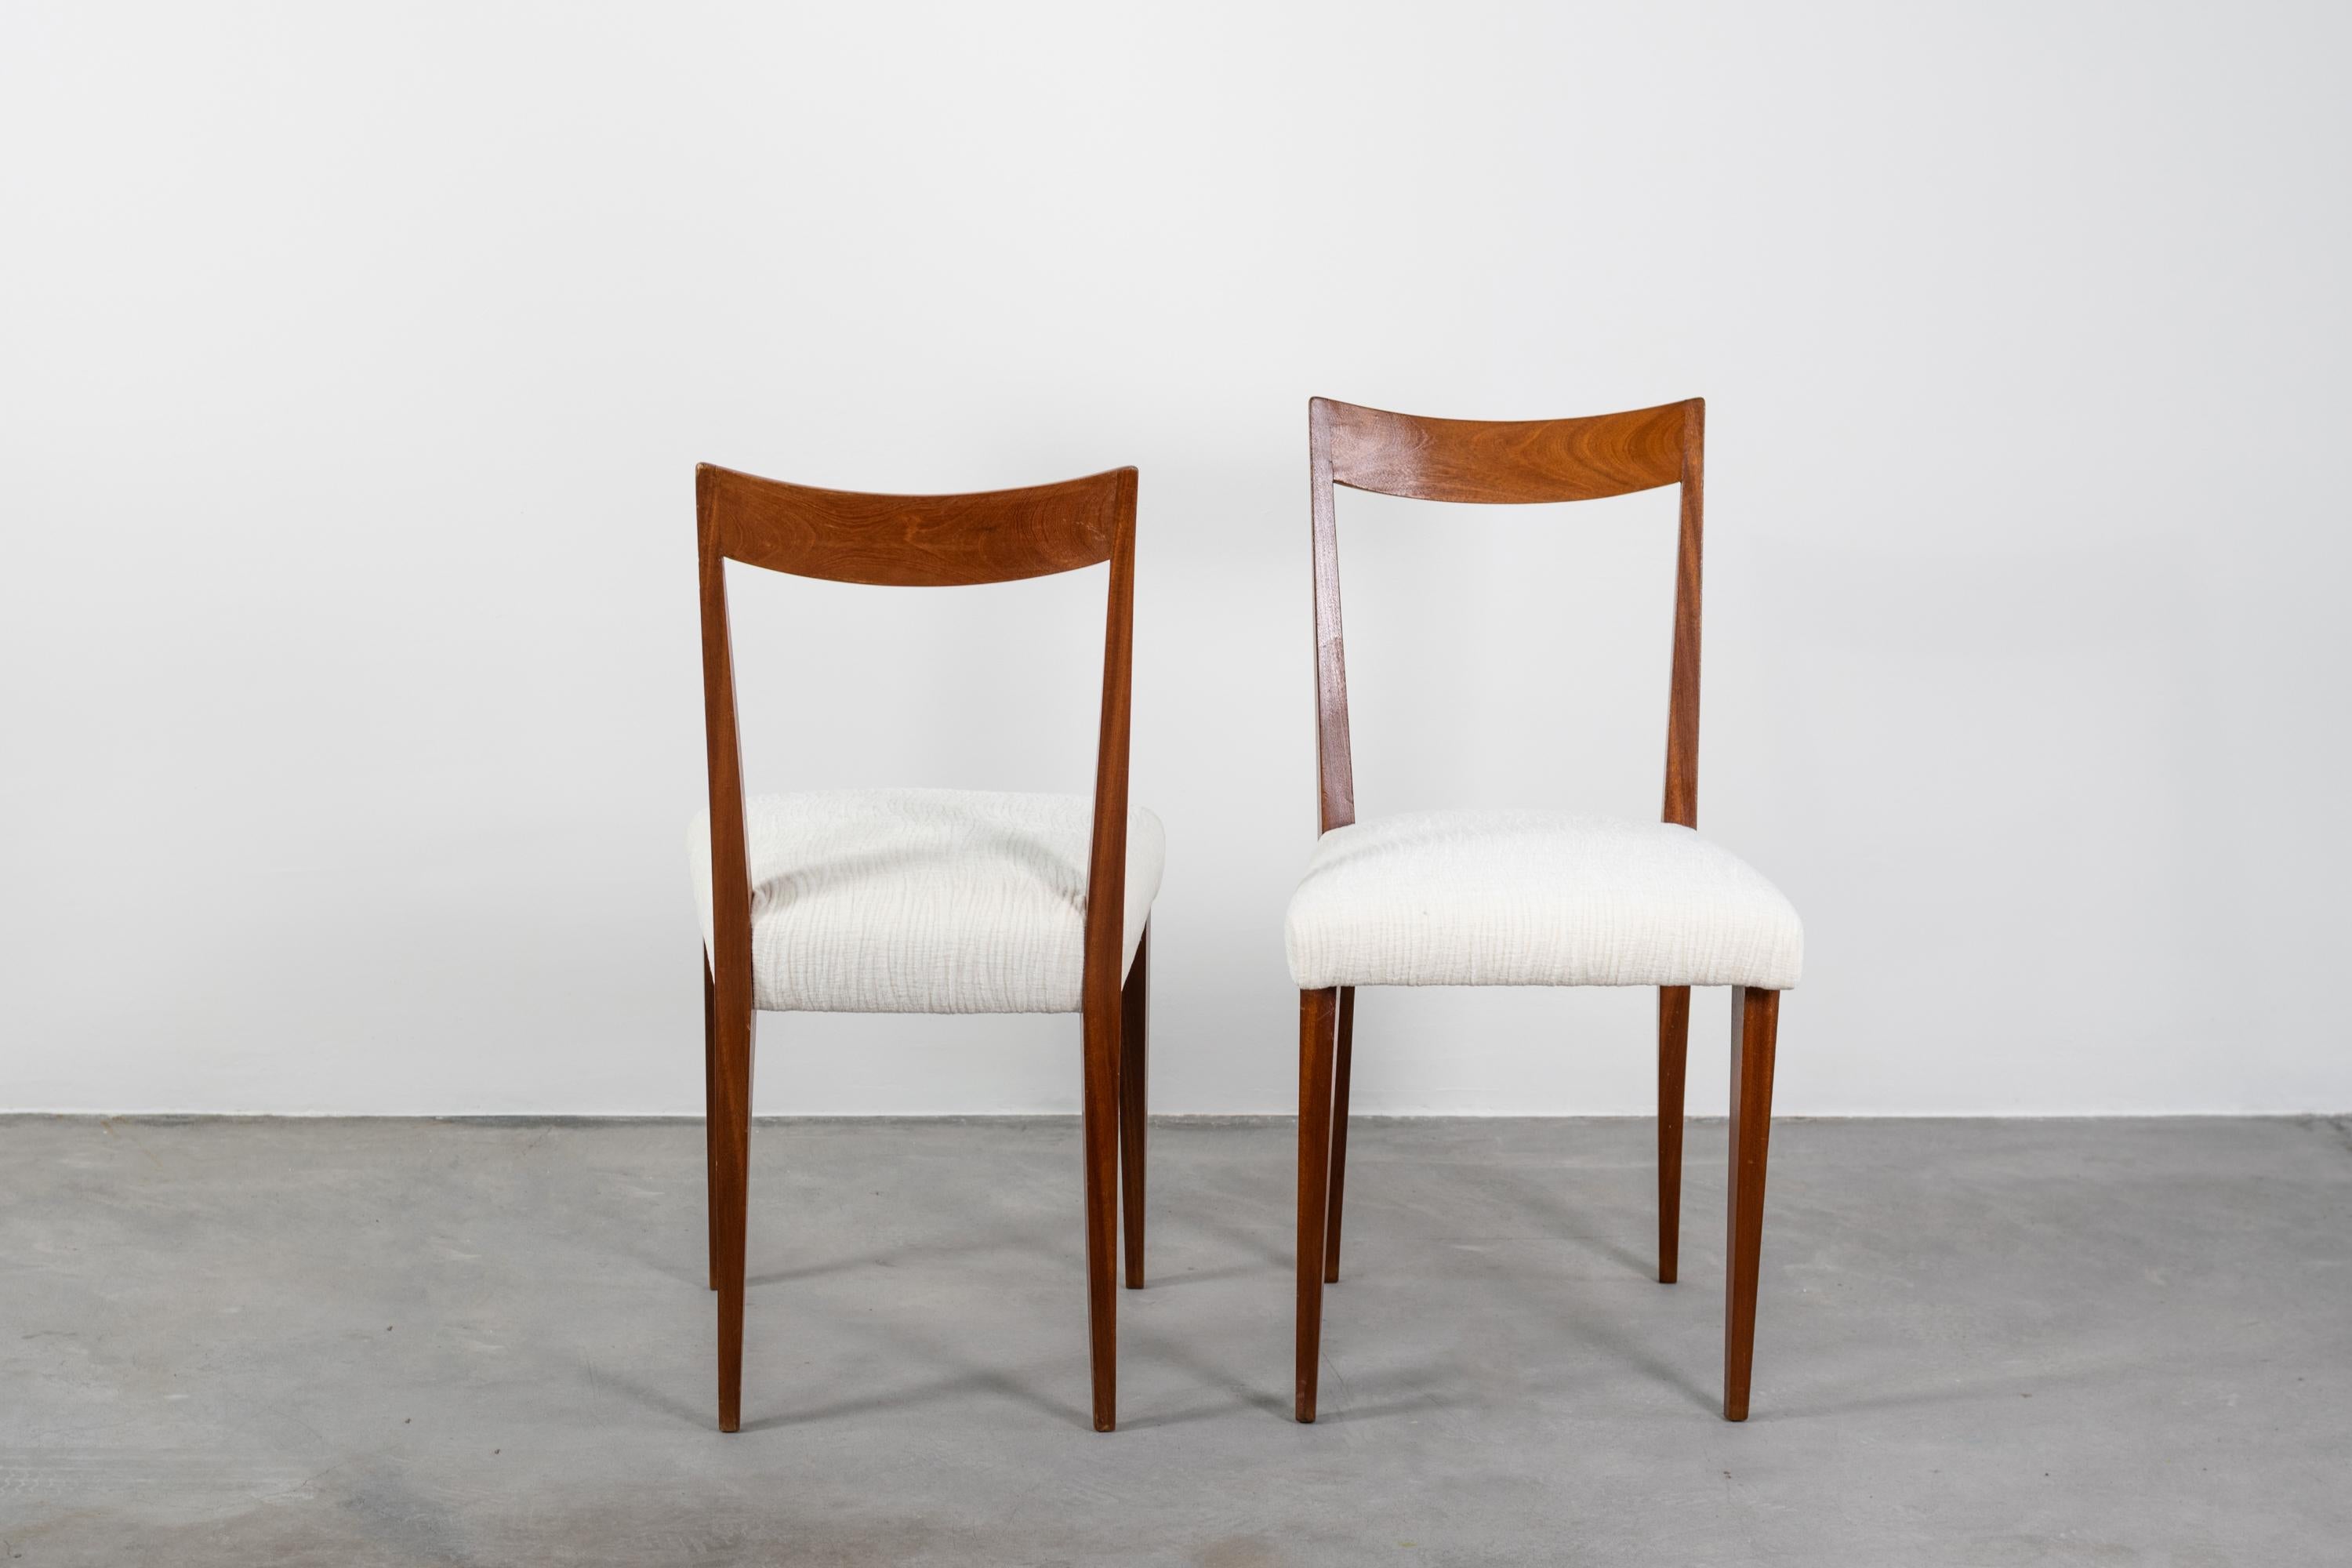 Two dining chairs attributed to Gio Ponti, with wooden structure and ivory fabric, circa 1960, Italy.
Recently restored.